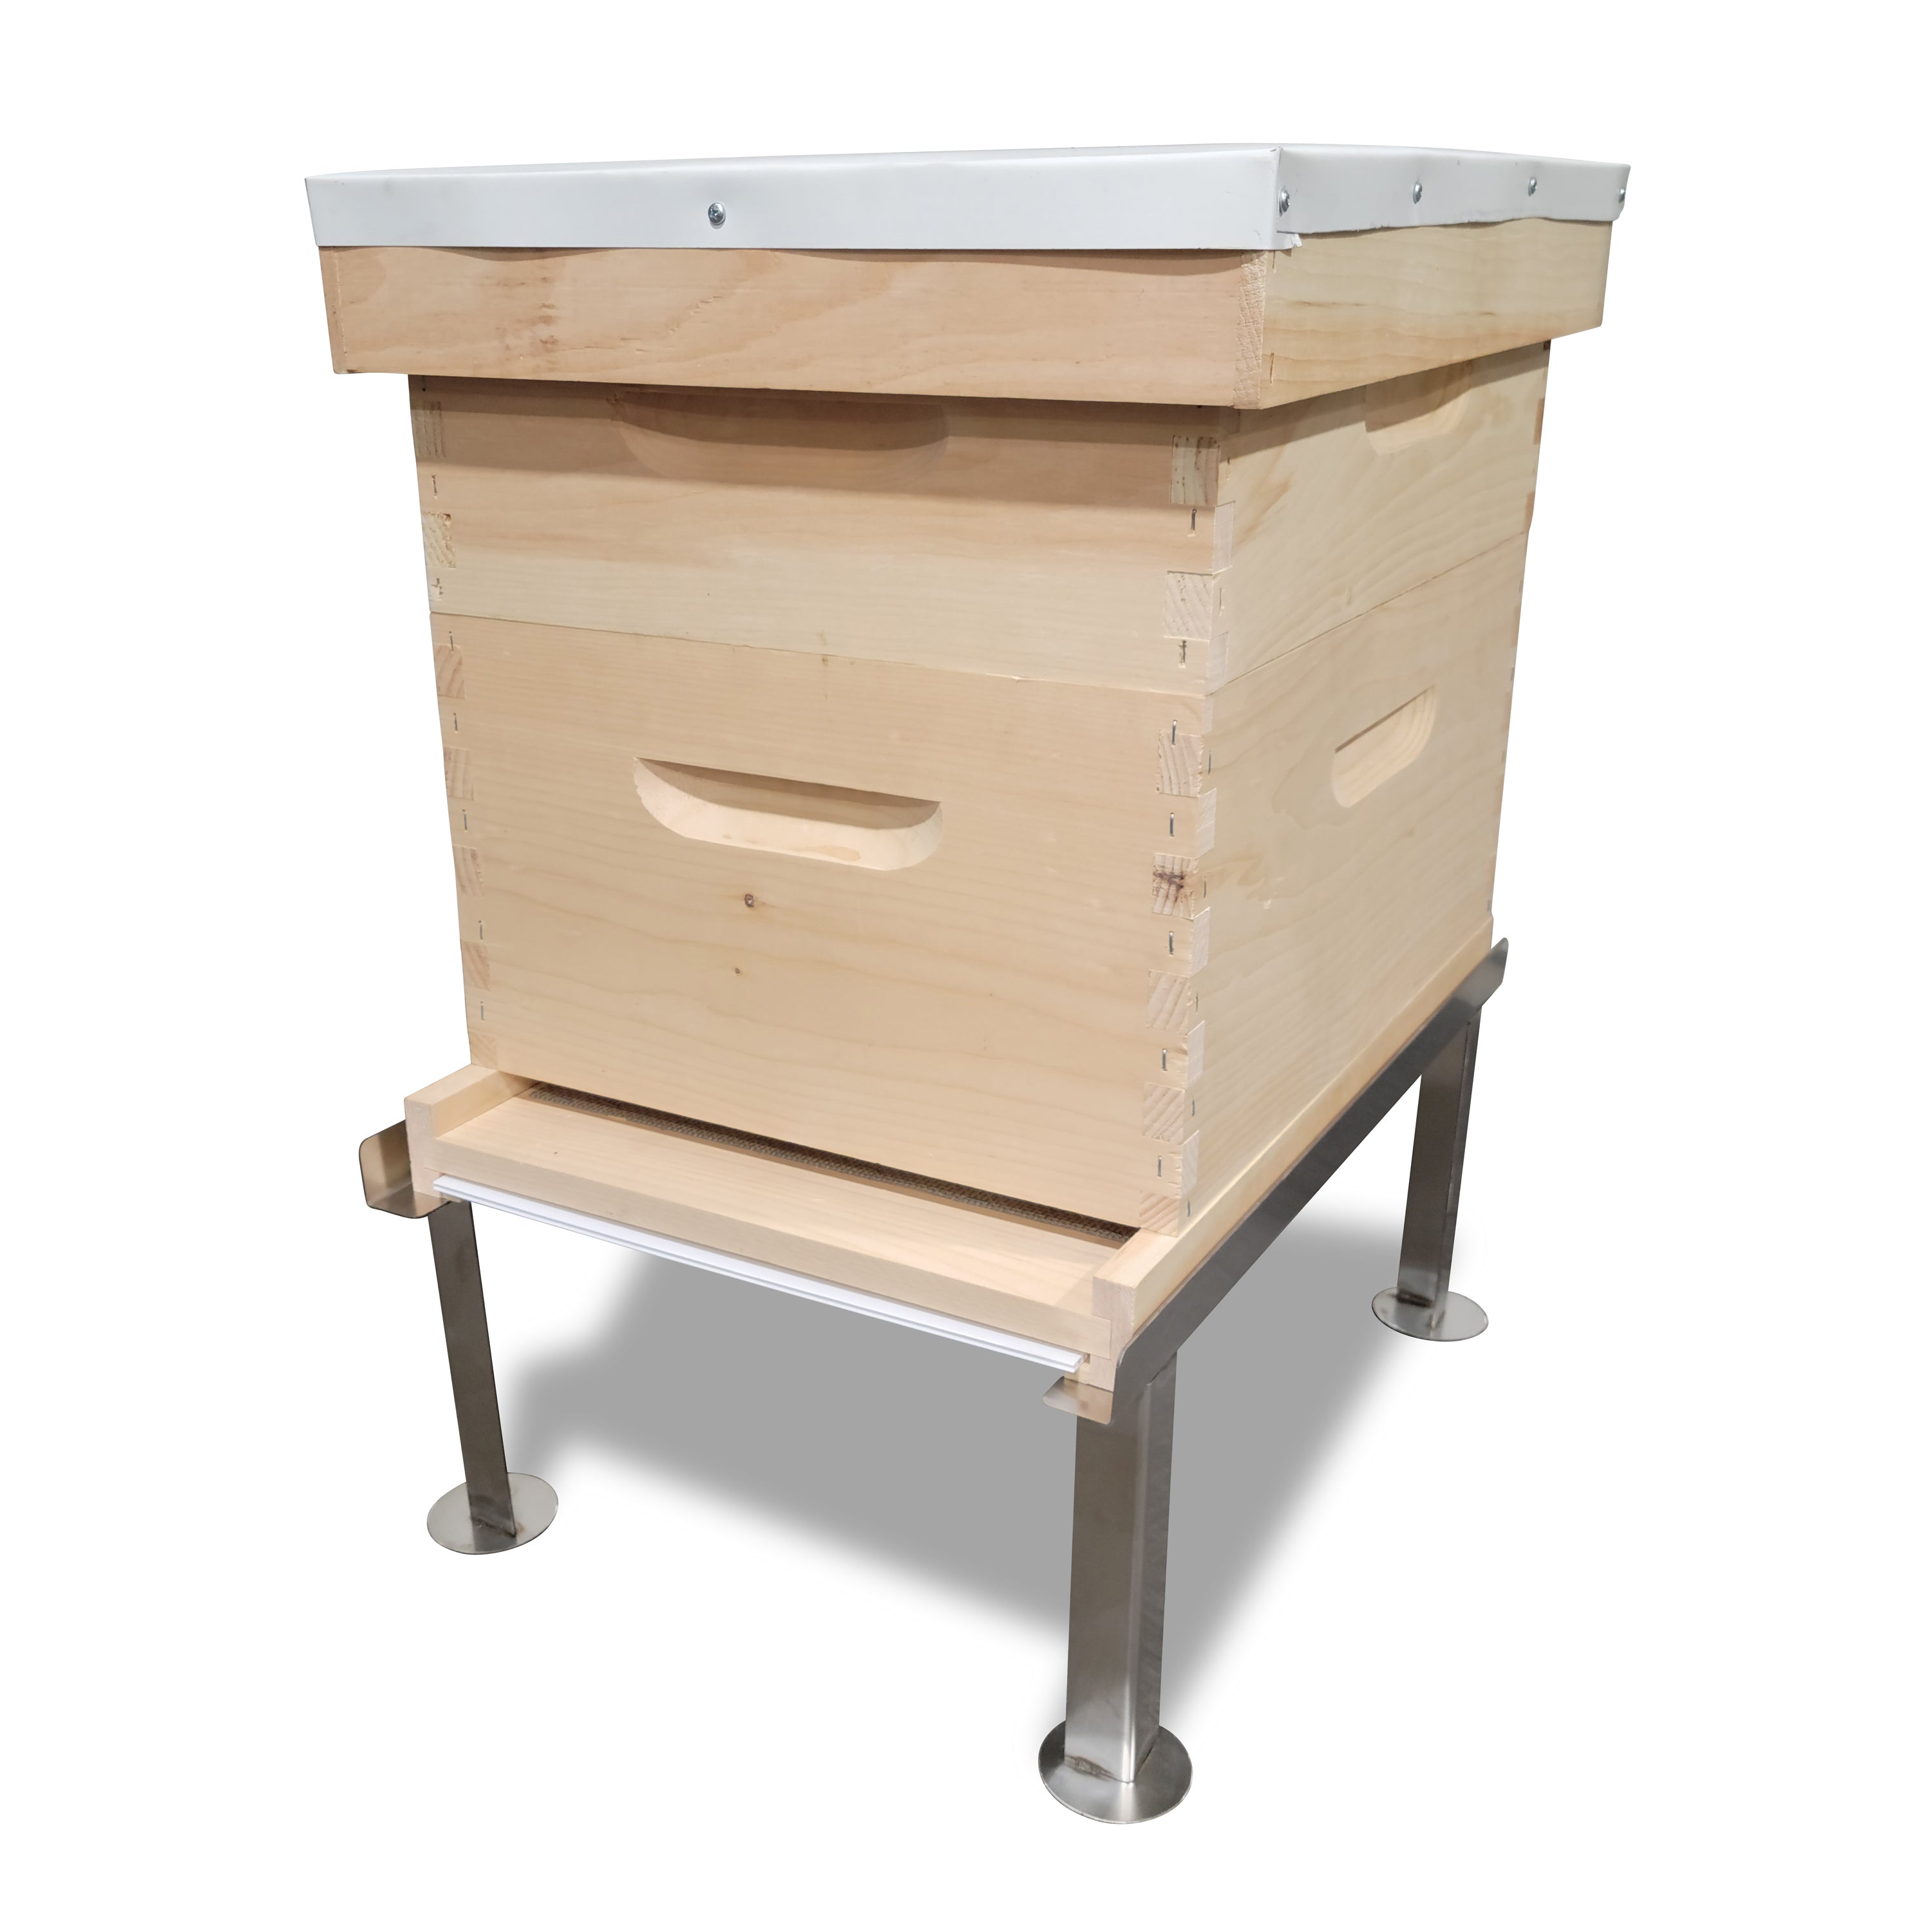 Stainless Steel Hive Stand - 8 or 10 Frame for beekeeping